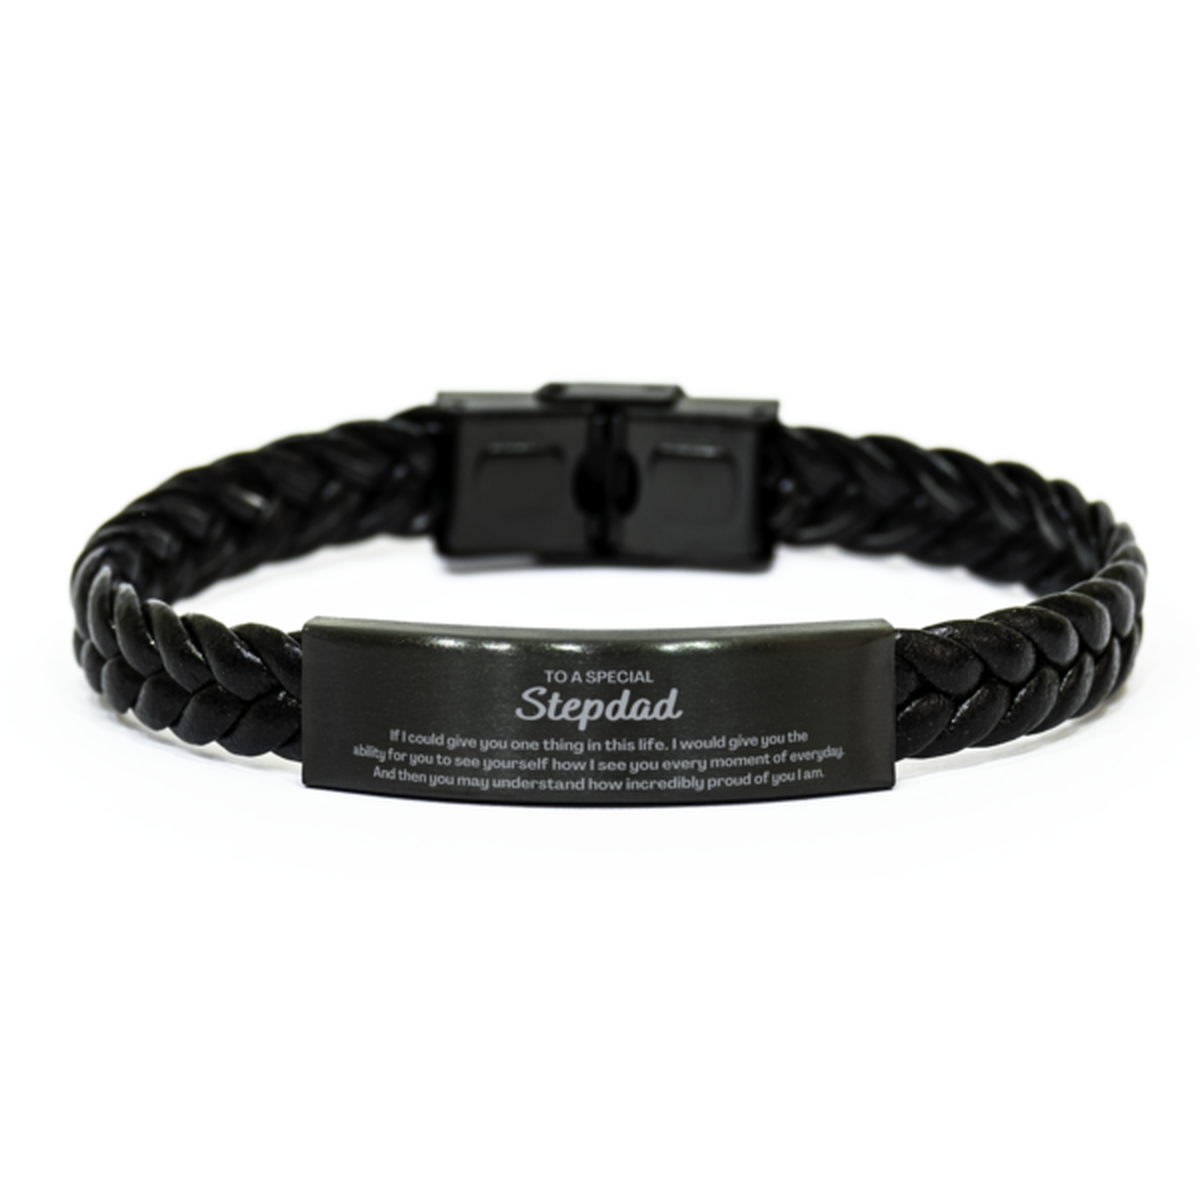 To My Stepdad Braided Leather Bracelet, Gifts For Stepdad Engraved, Inspirational Gifts for Christmas Birthday, Epic Gifts for Stepdad To A Special Stepdad how incredibly proud of you I am